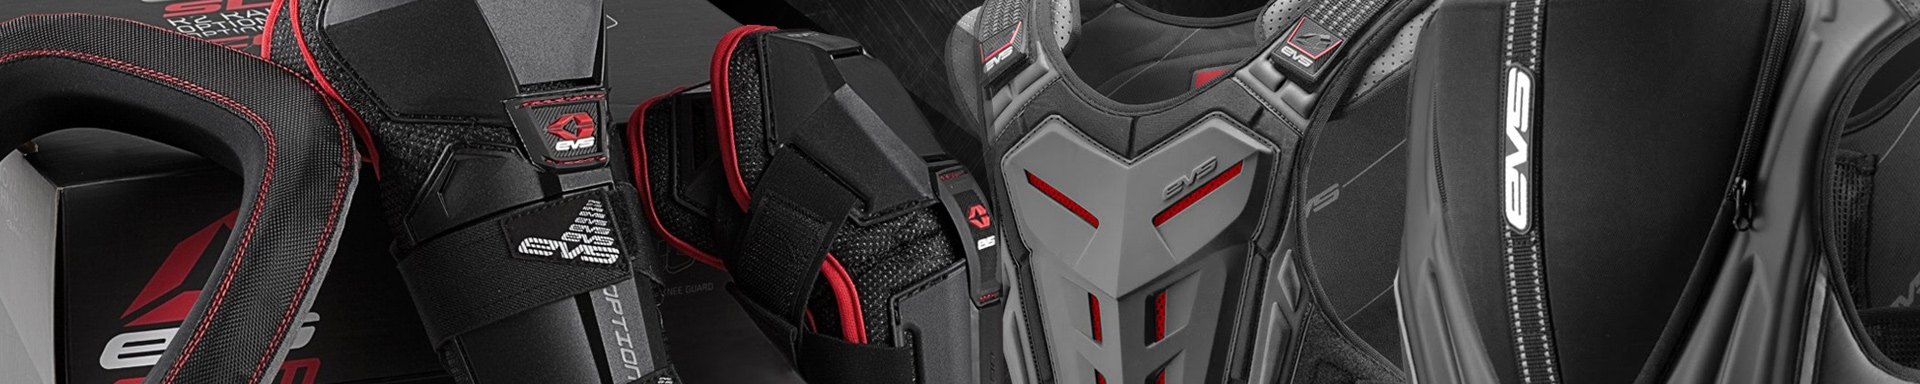 EVS Sports Chest & Back Protection